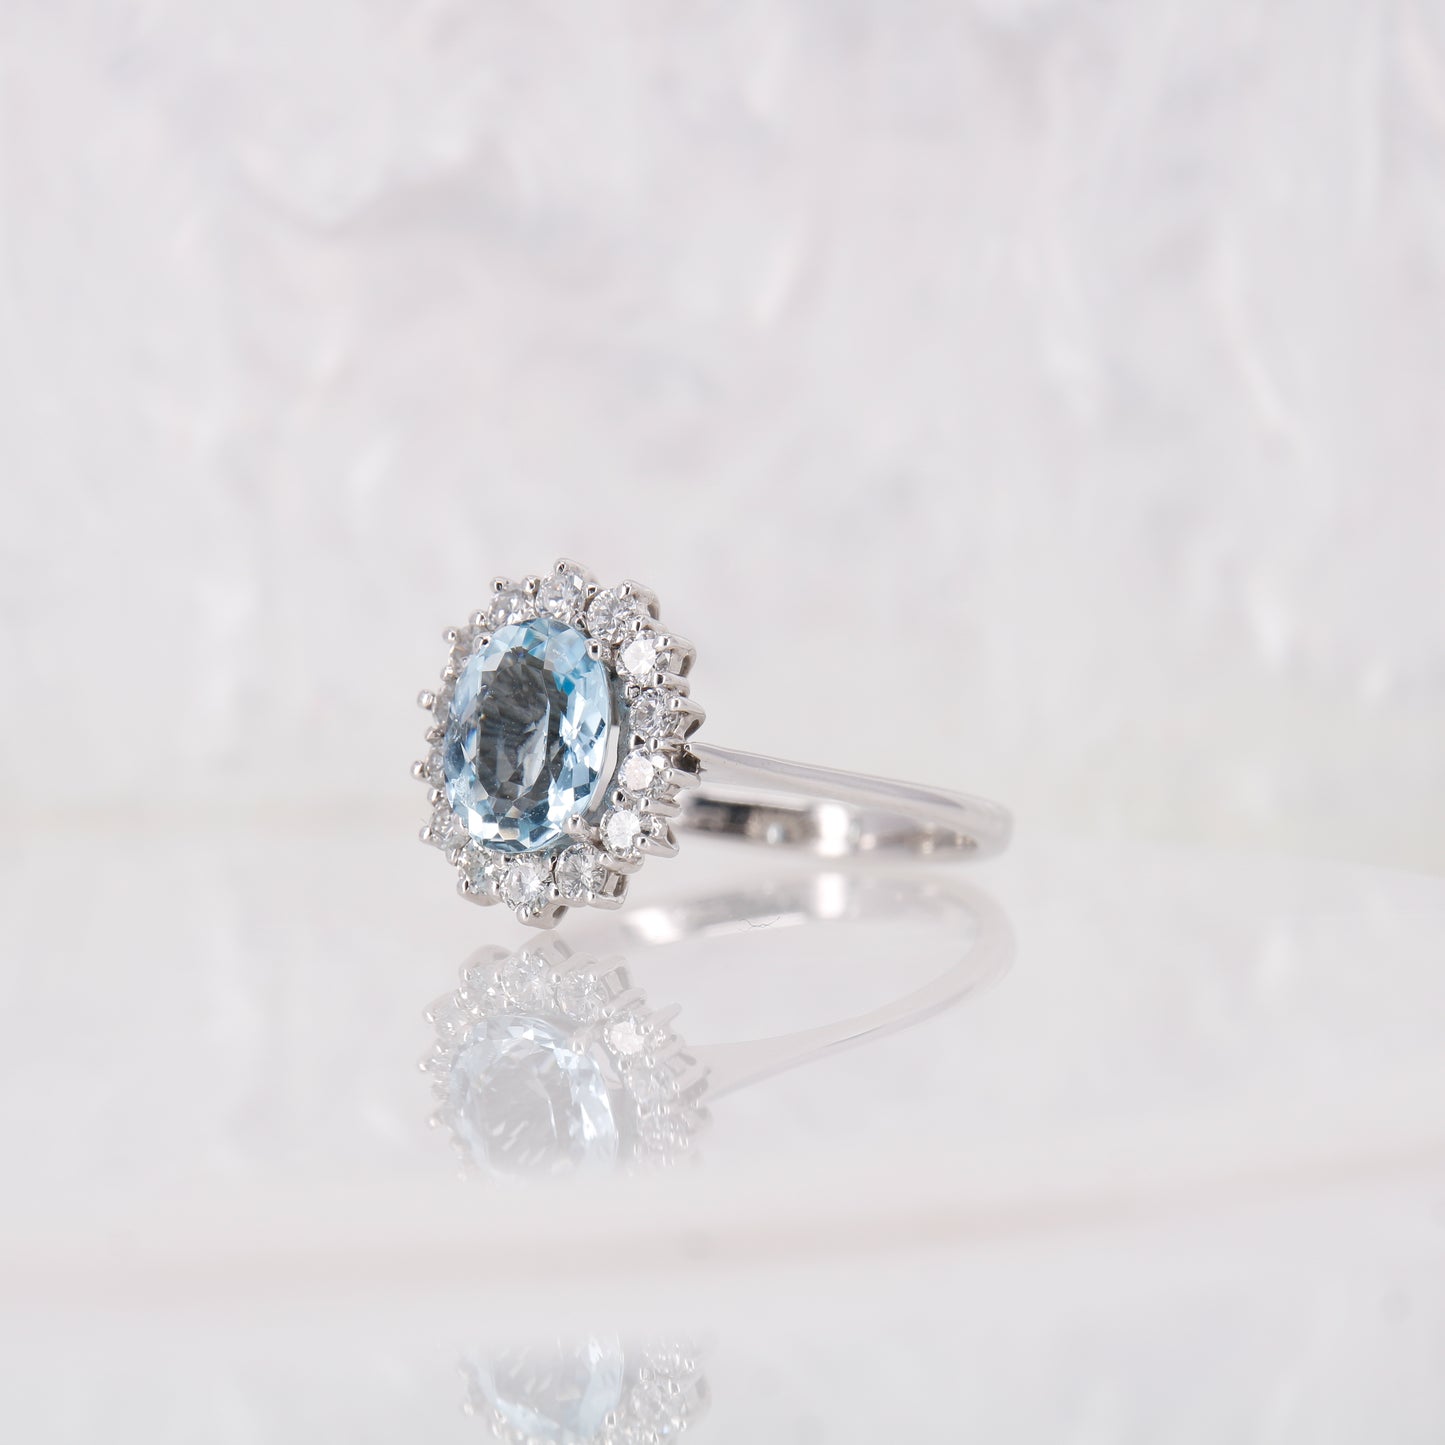 Vintage Secondhand Aquamarine and Diamond Engagement Ring 18ct white gold oval cut aquamarine with a halo of diamonds